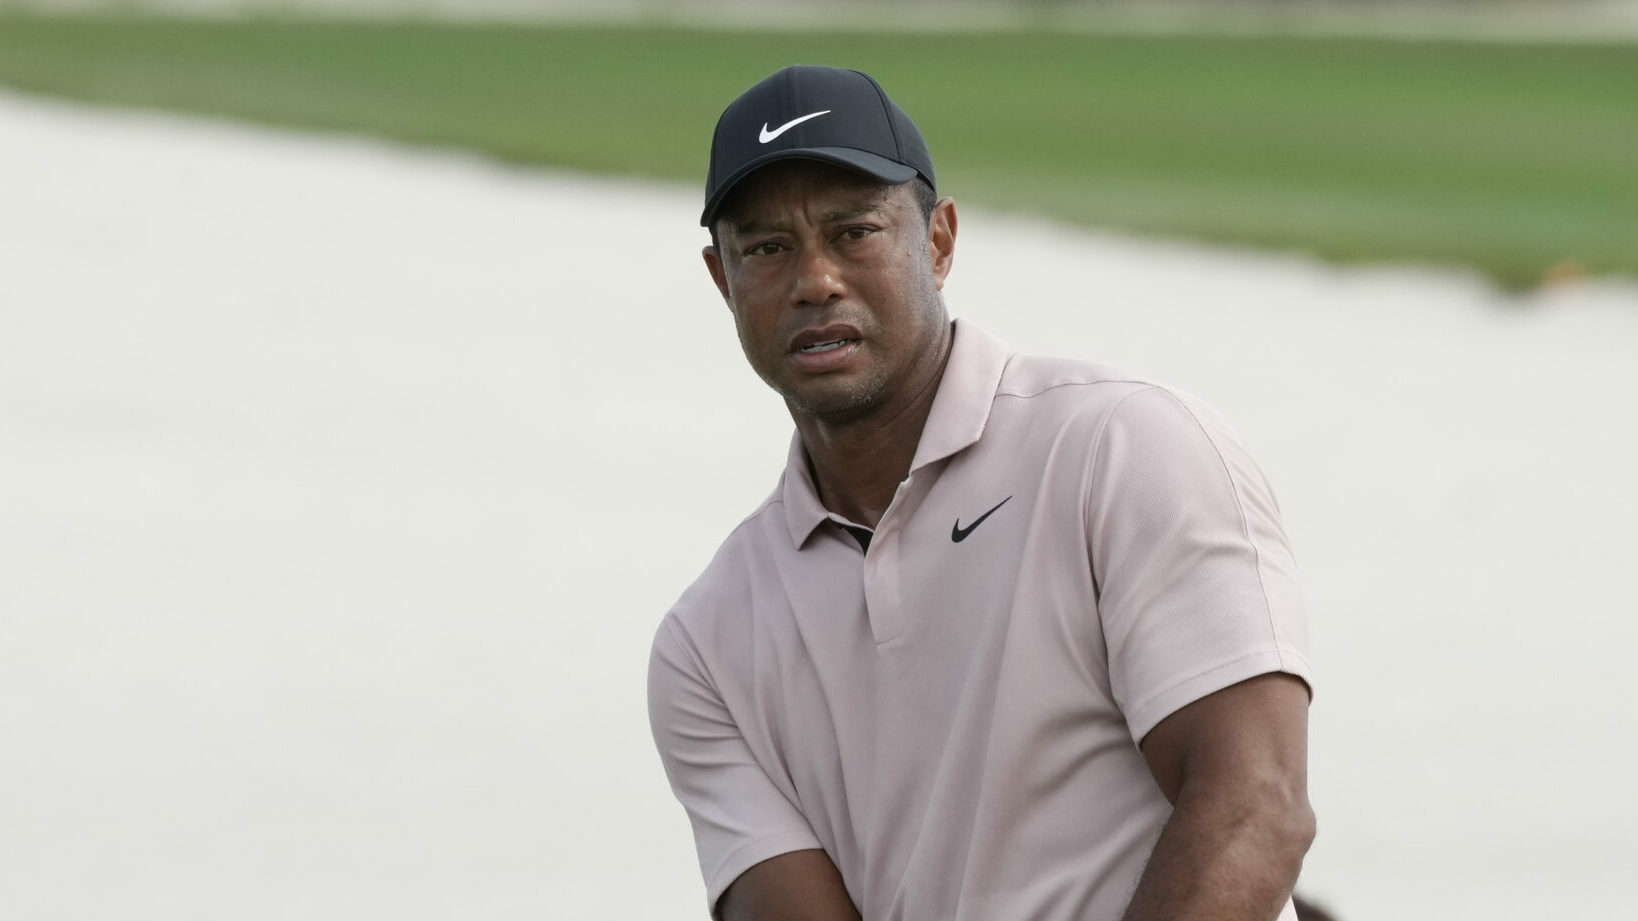 Tiger Woods during the first round of the Hero World Challenge